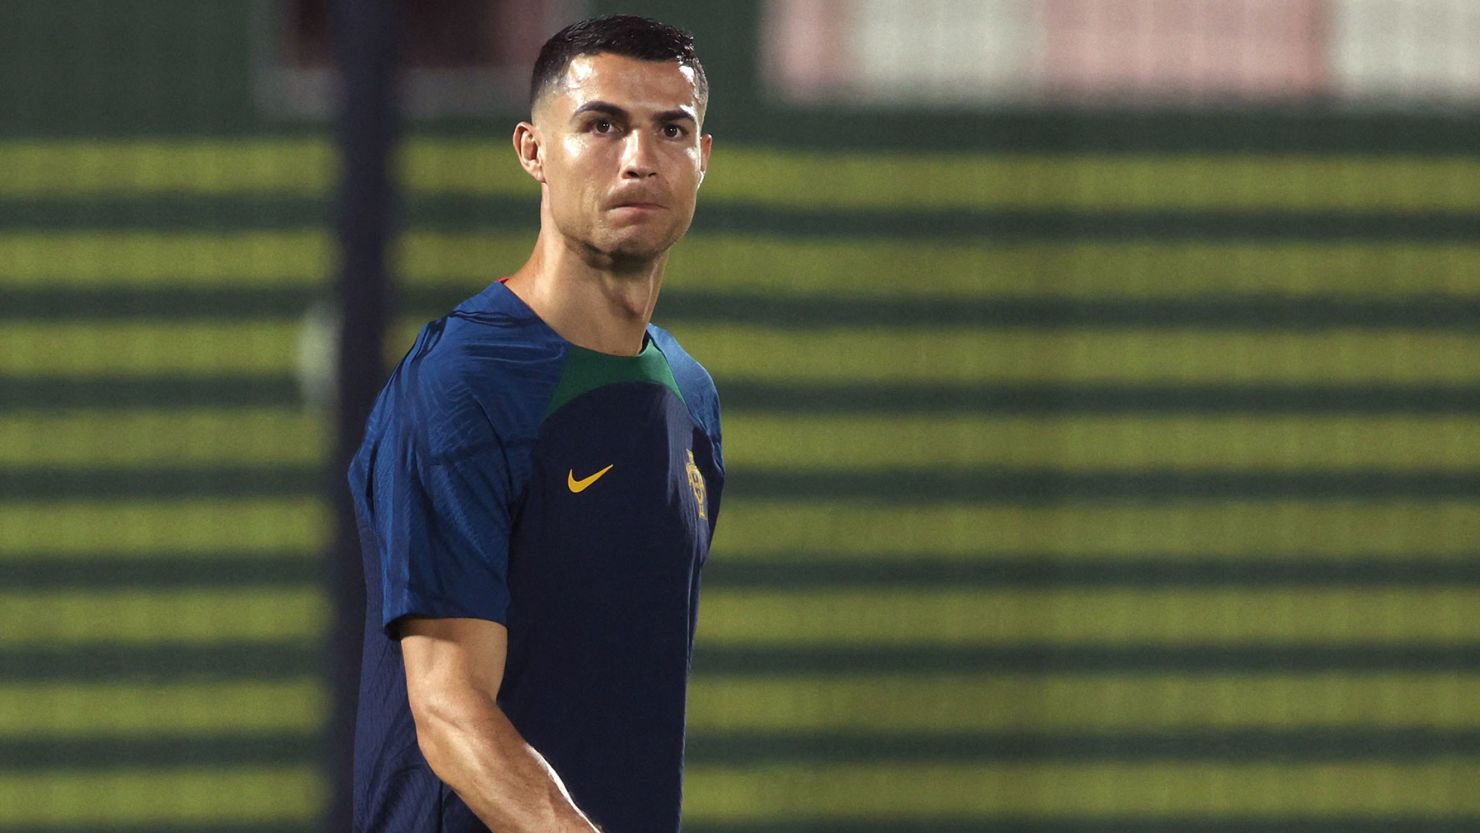 Cristiano Ronaldo begins World Cup campaign with Portugal after